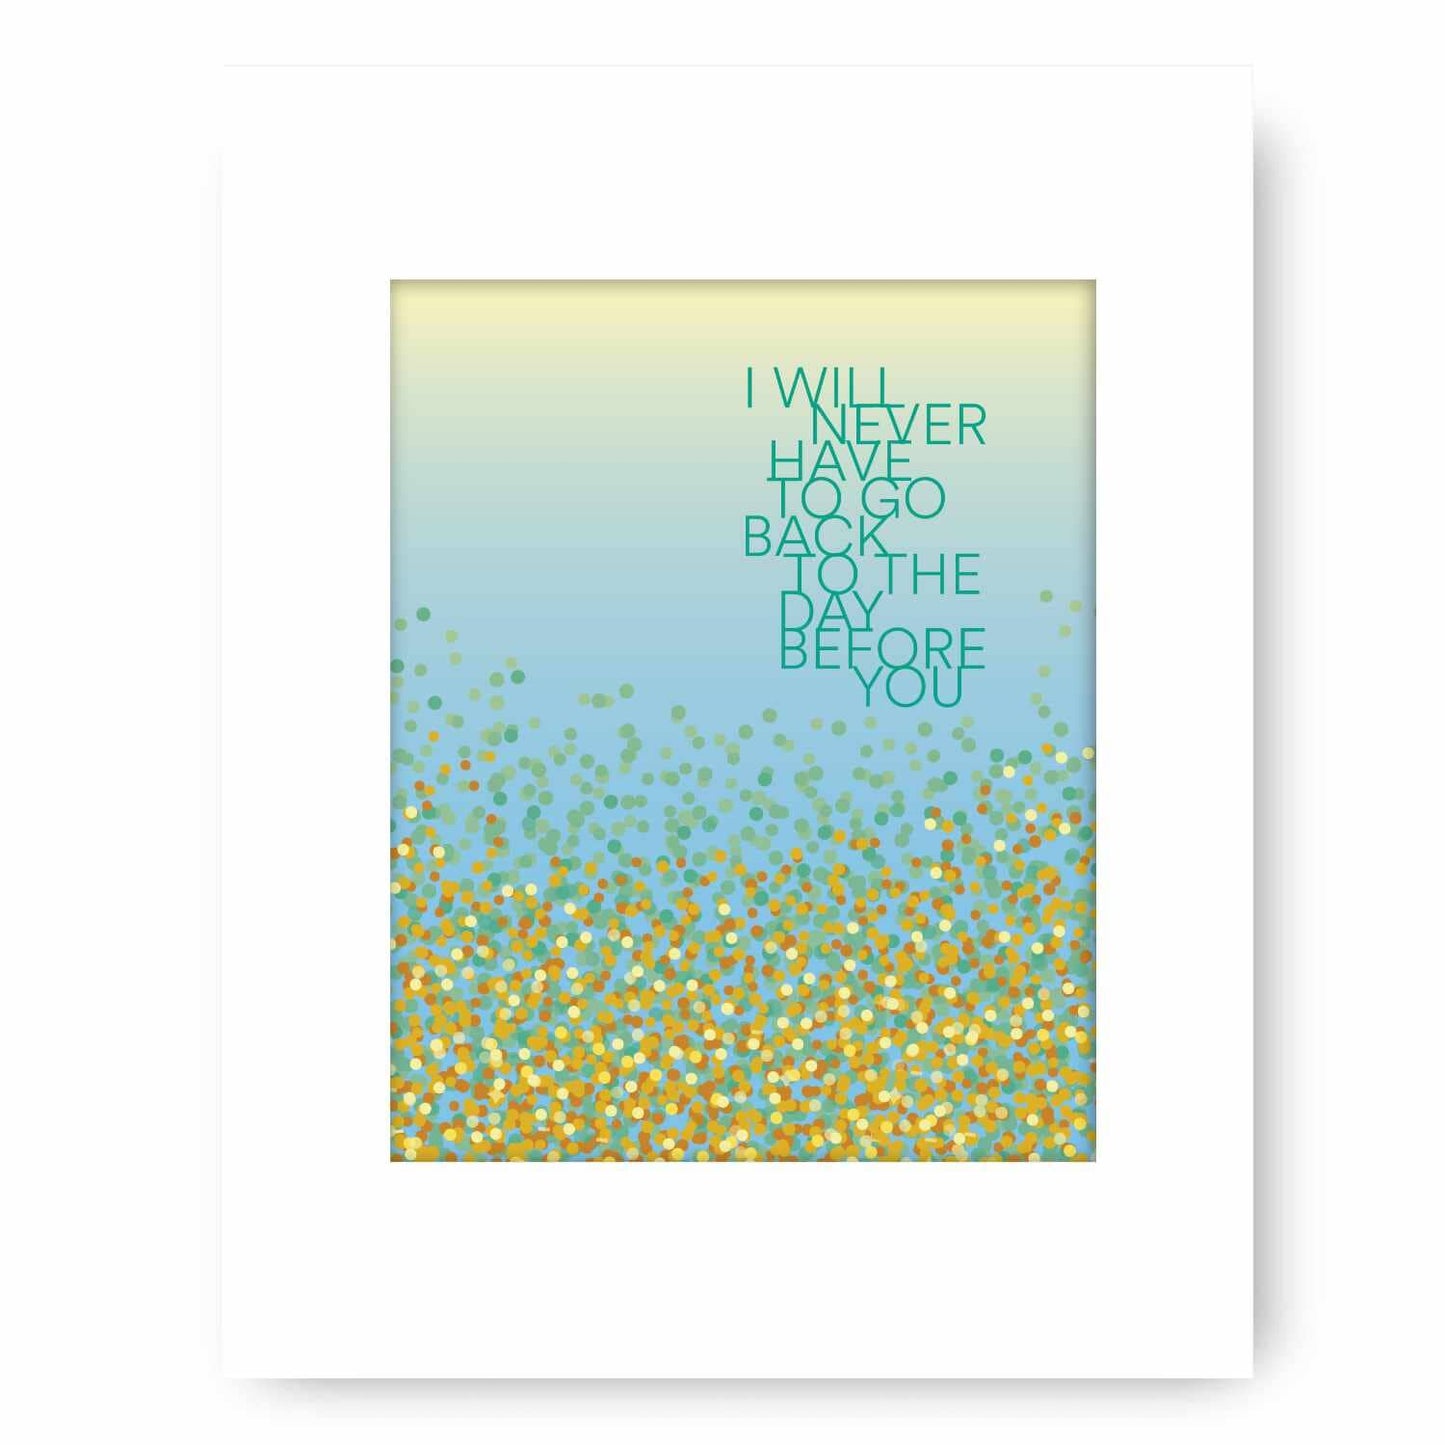 The Day Before You by Matthew West - Song Lyric Art Print Song Lyrics Art Song Lyrics Art 8x10 White Matted Print 